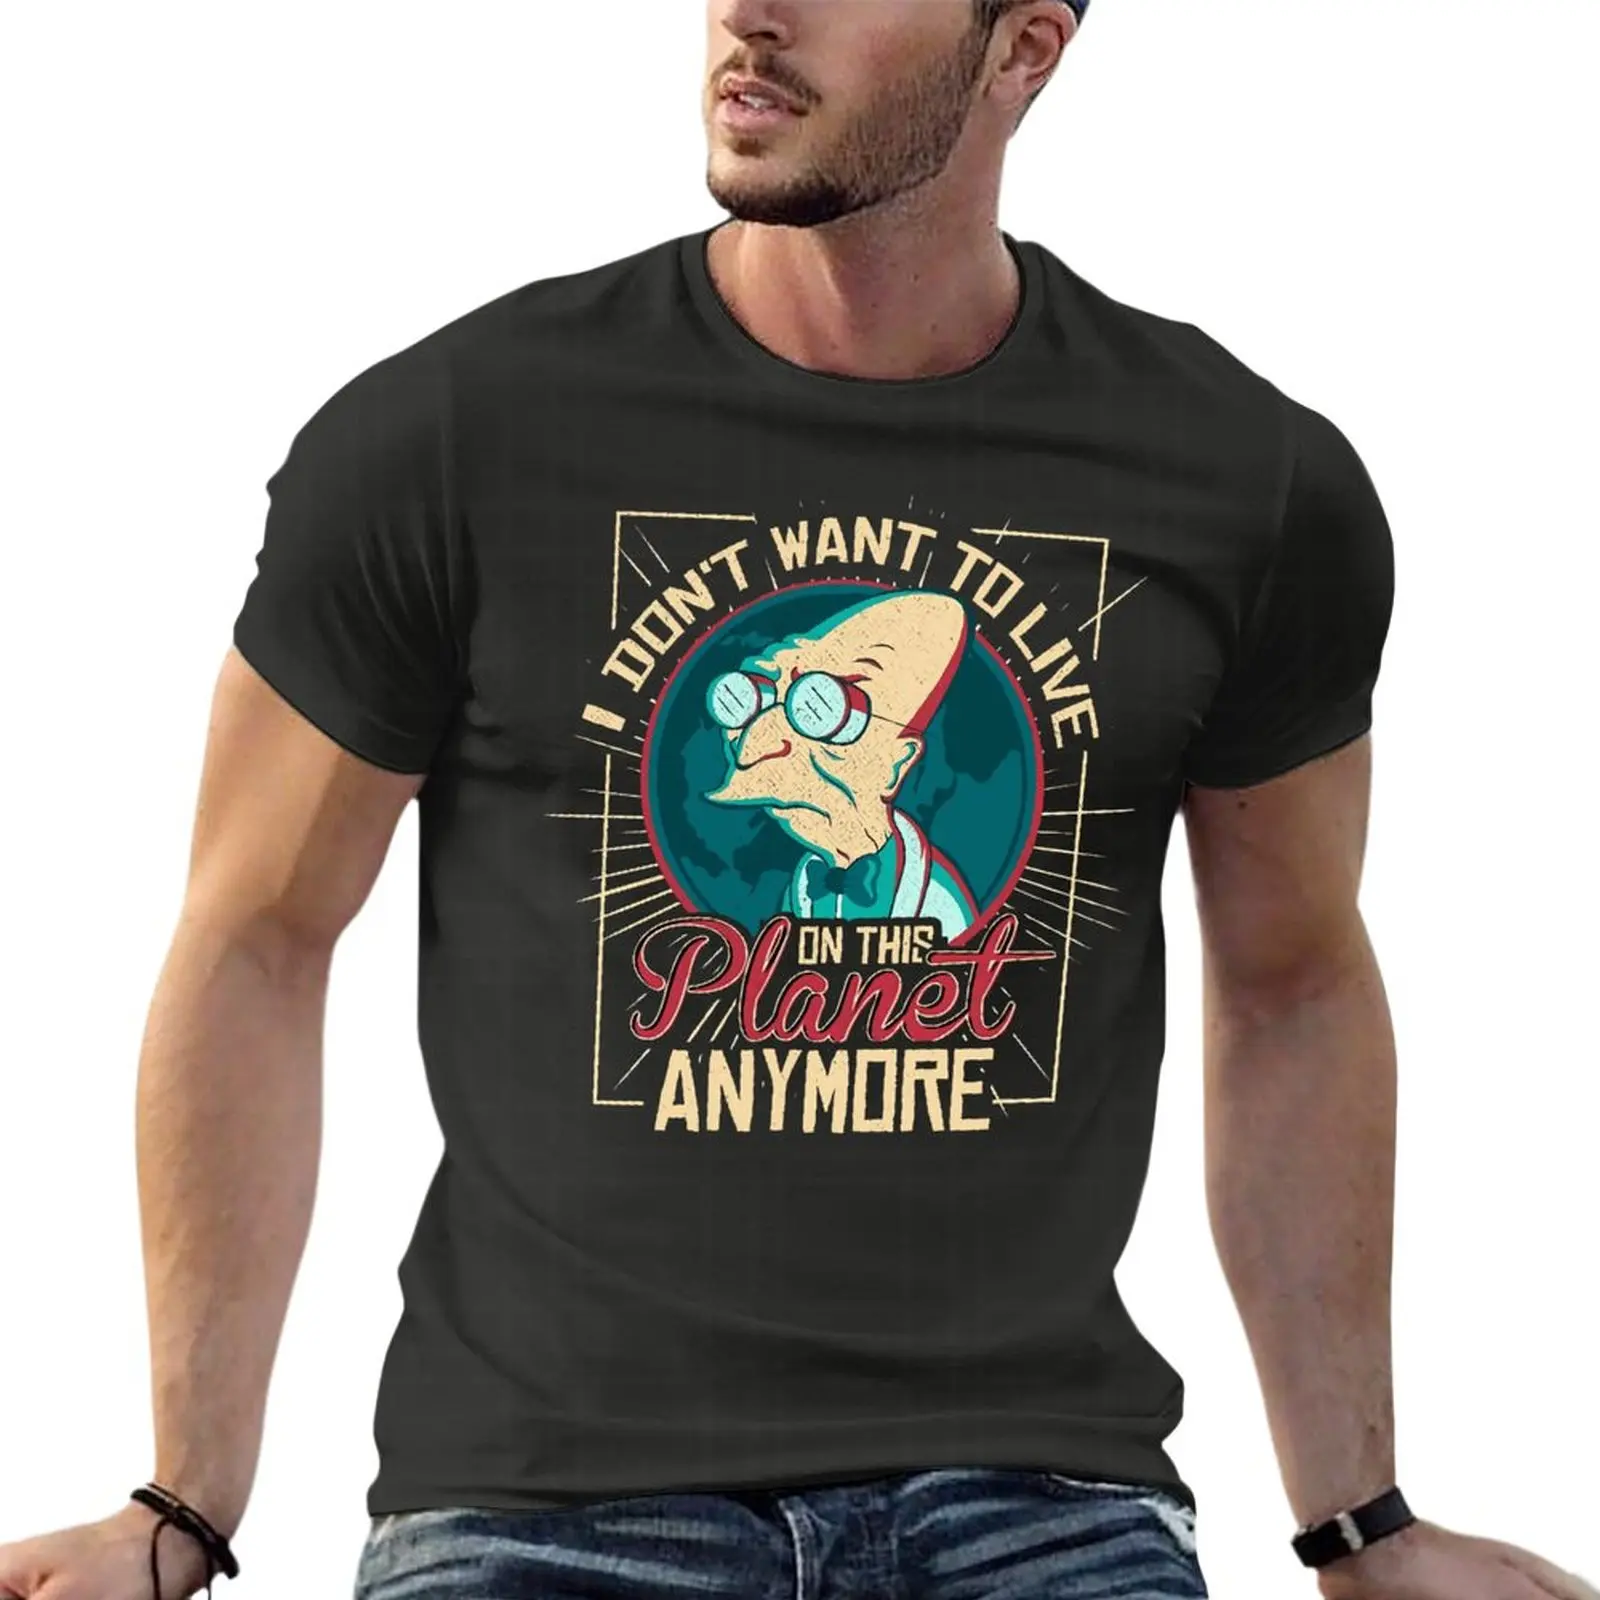 

Professor Hubert Farnsworth I Don'T Want To Live On This Planet Anymor Oversized T-Shirt Harajuku Men Clothes 100% Cotton Street